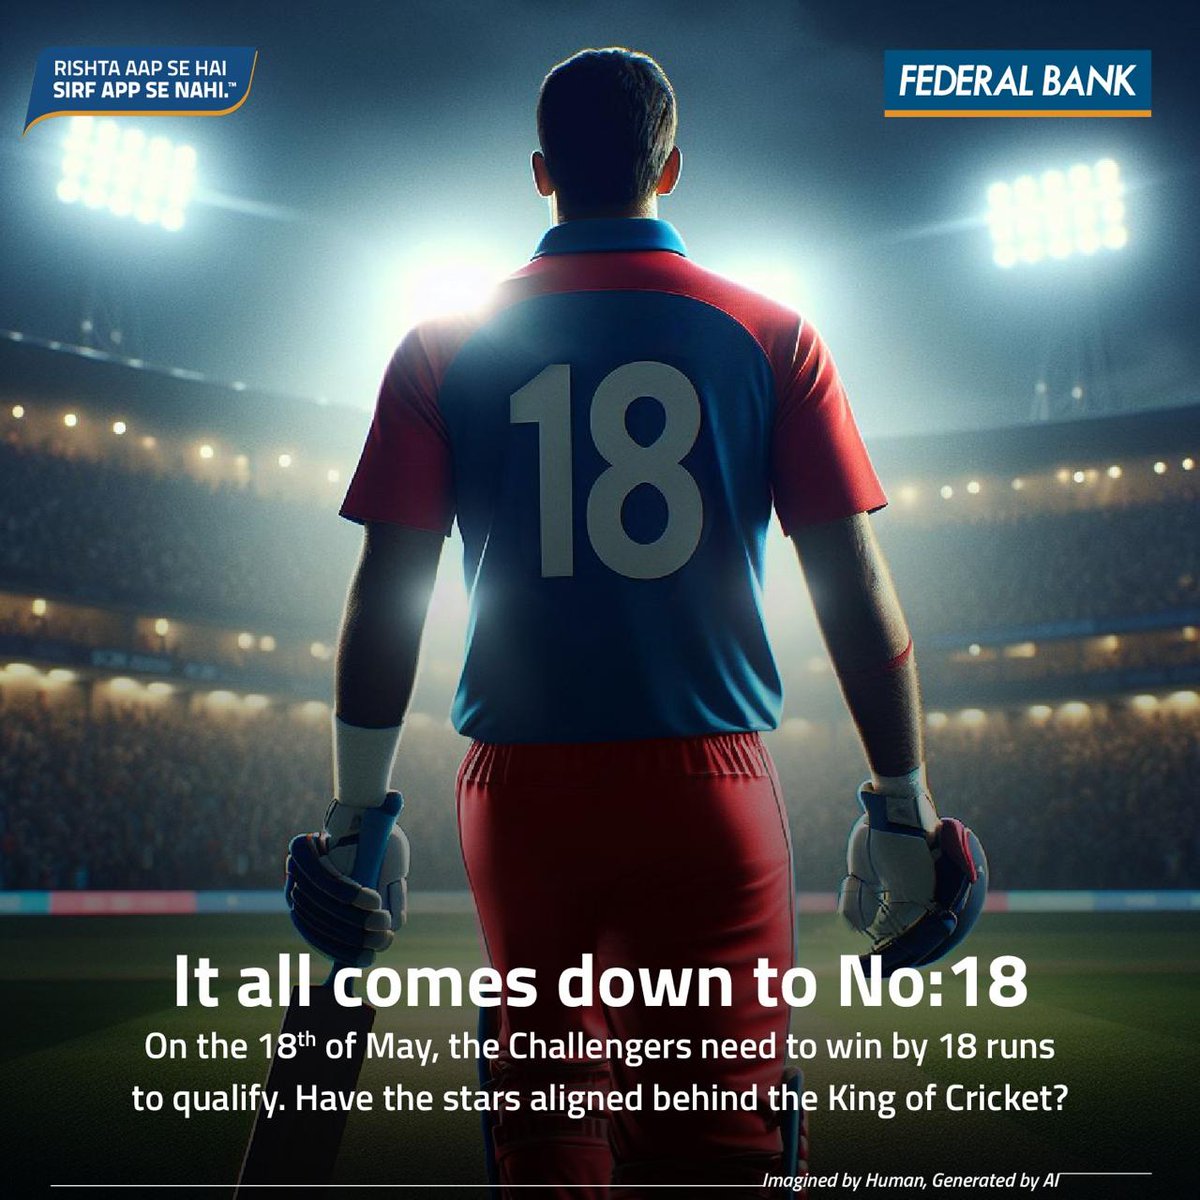 Will RCB win the numbers game today or will it be CSK's match? Either ways, we will surely be on the edge of our seats! If you've got a prediction for the outcome tonight, let us know in the comments below. #IPL2024 #FederalBank